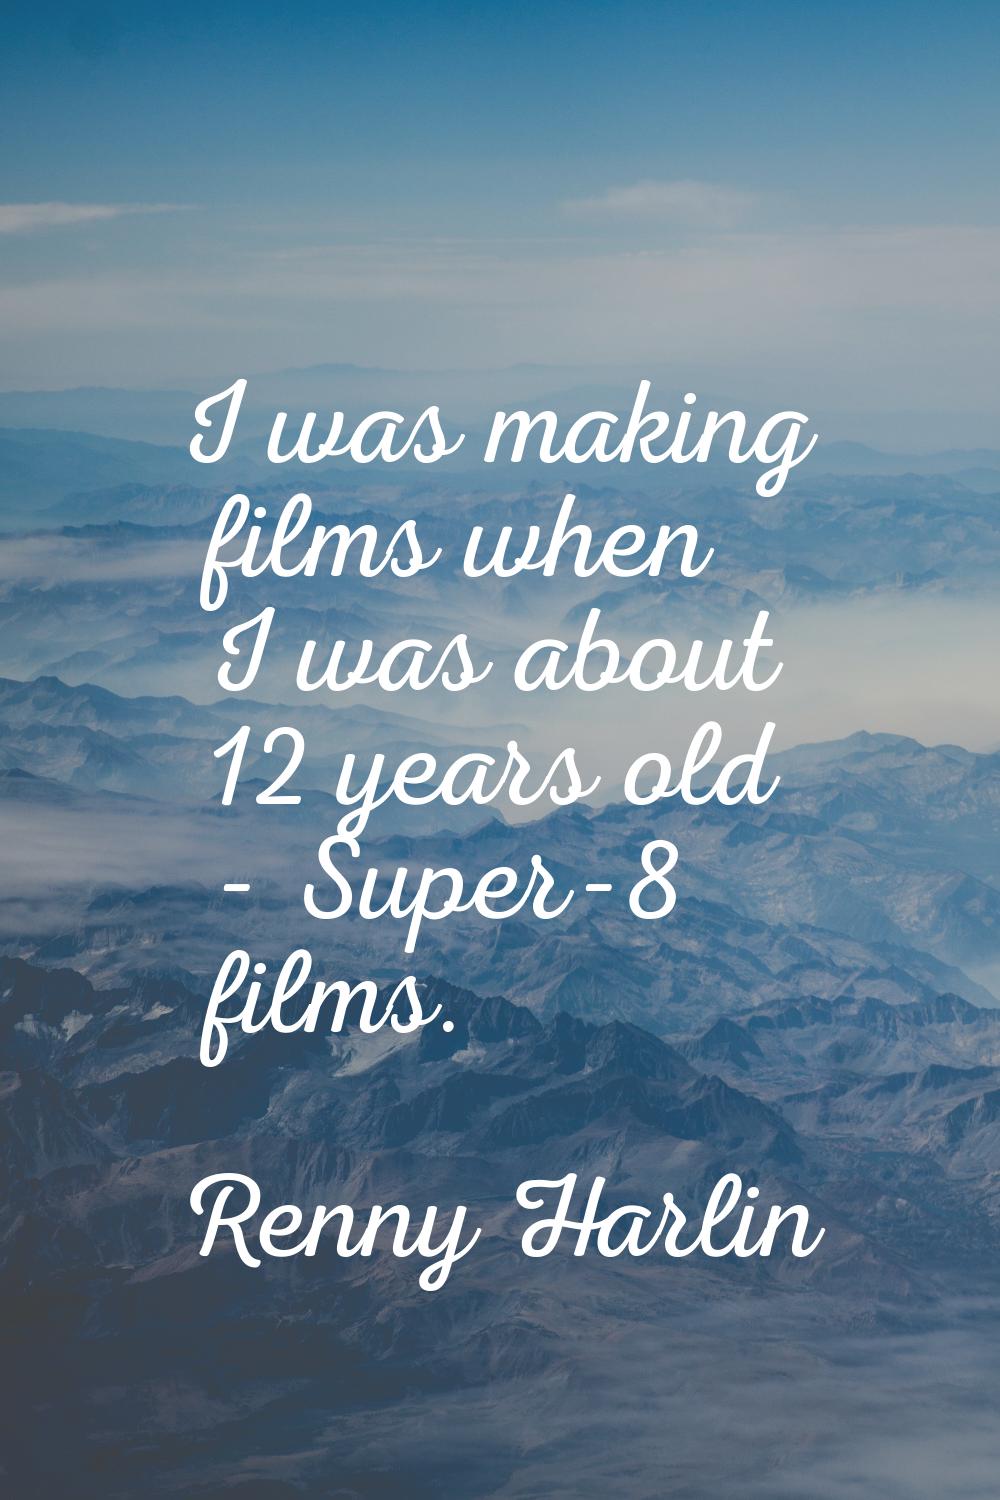 I was making films when I was about 12 years old - Super-8 films.